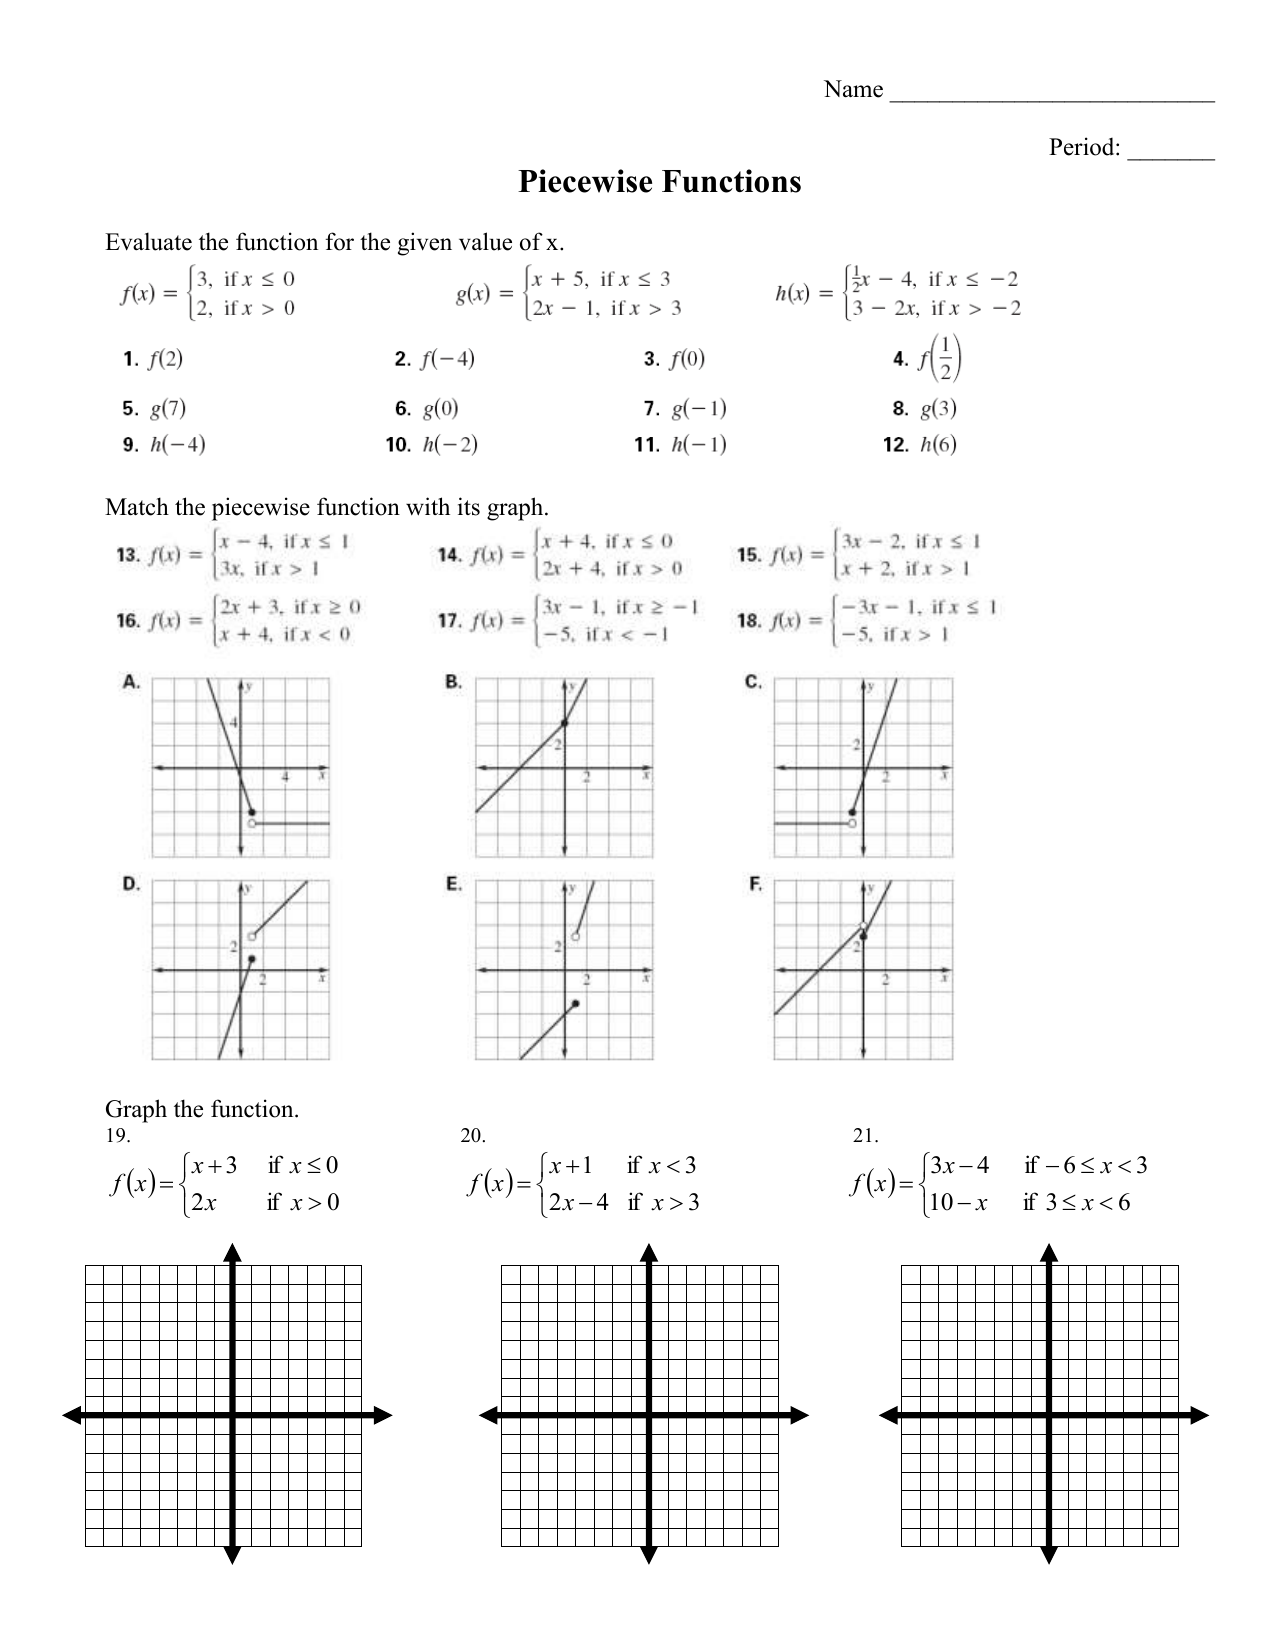 worksheet piecewise functions answer key